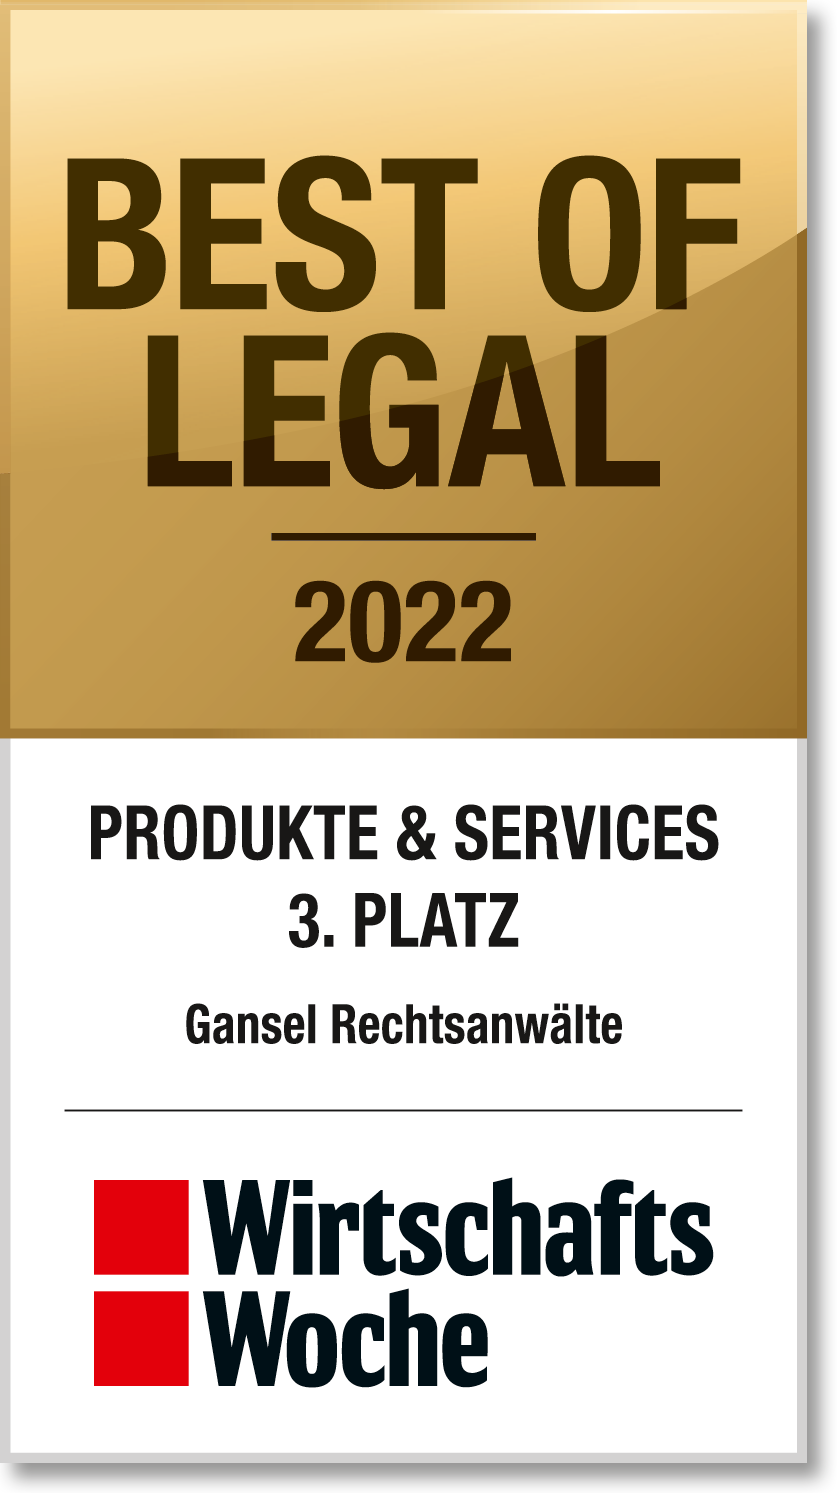 Best of Legal Award 2022: Produkte & Services